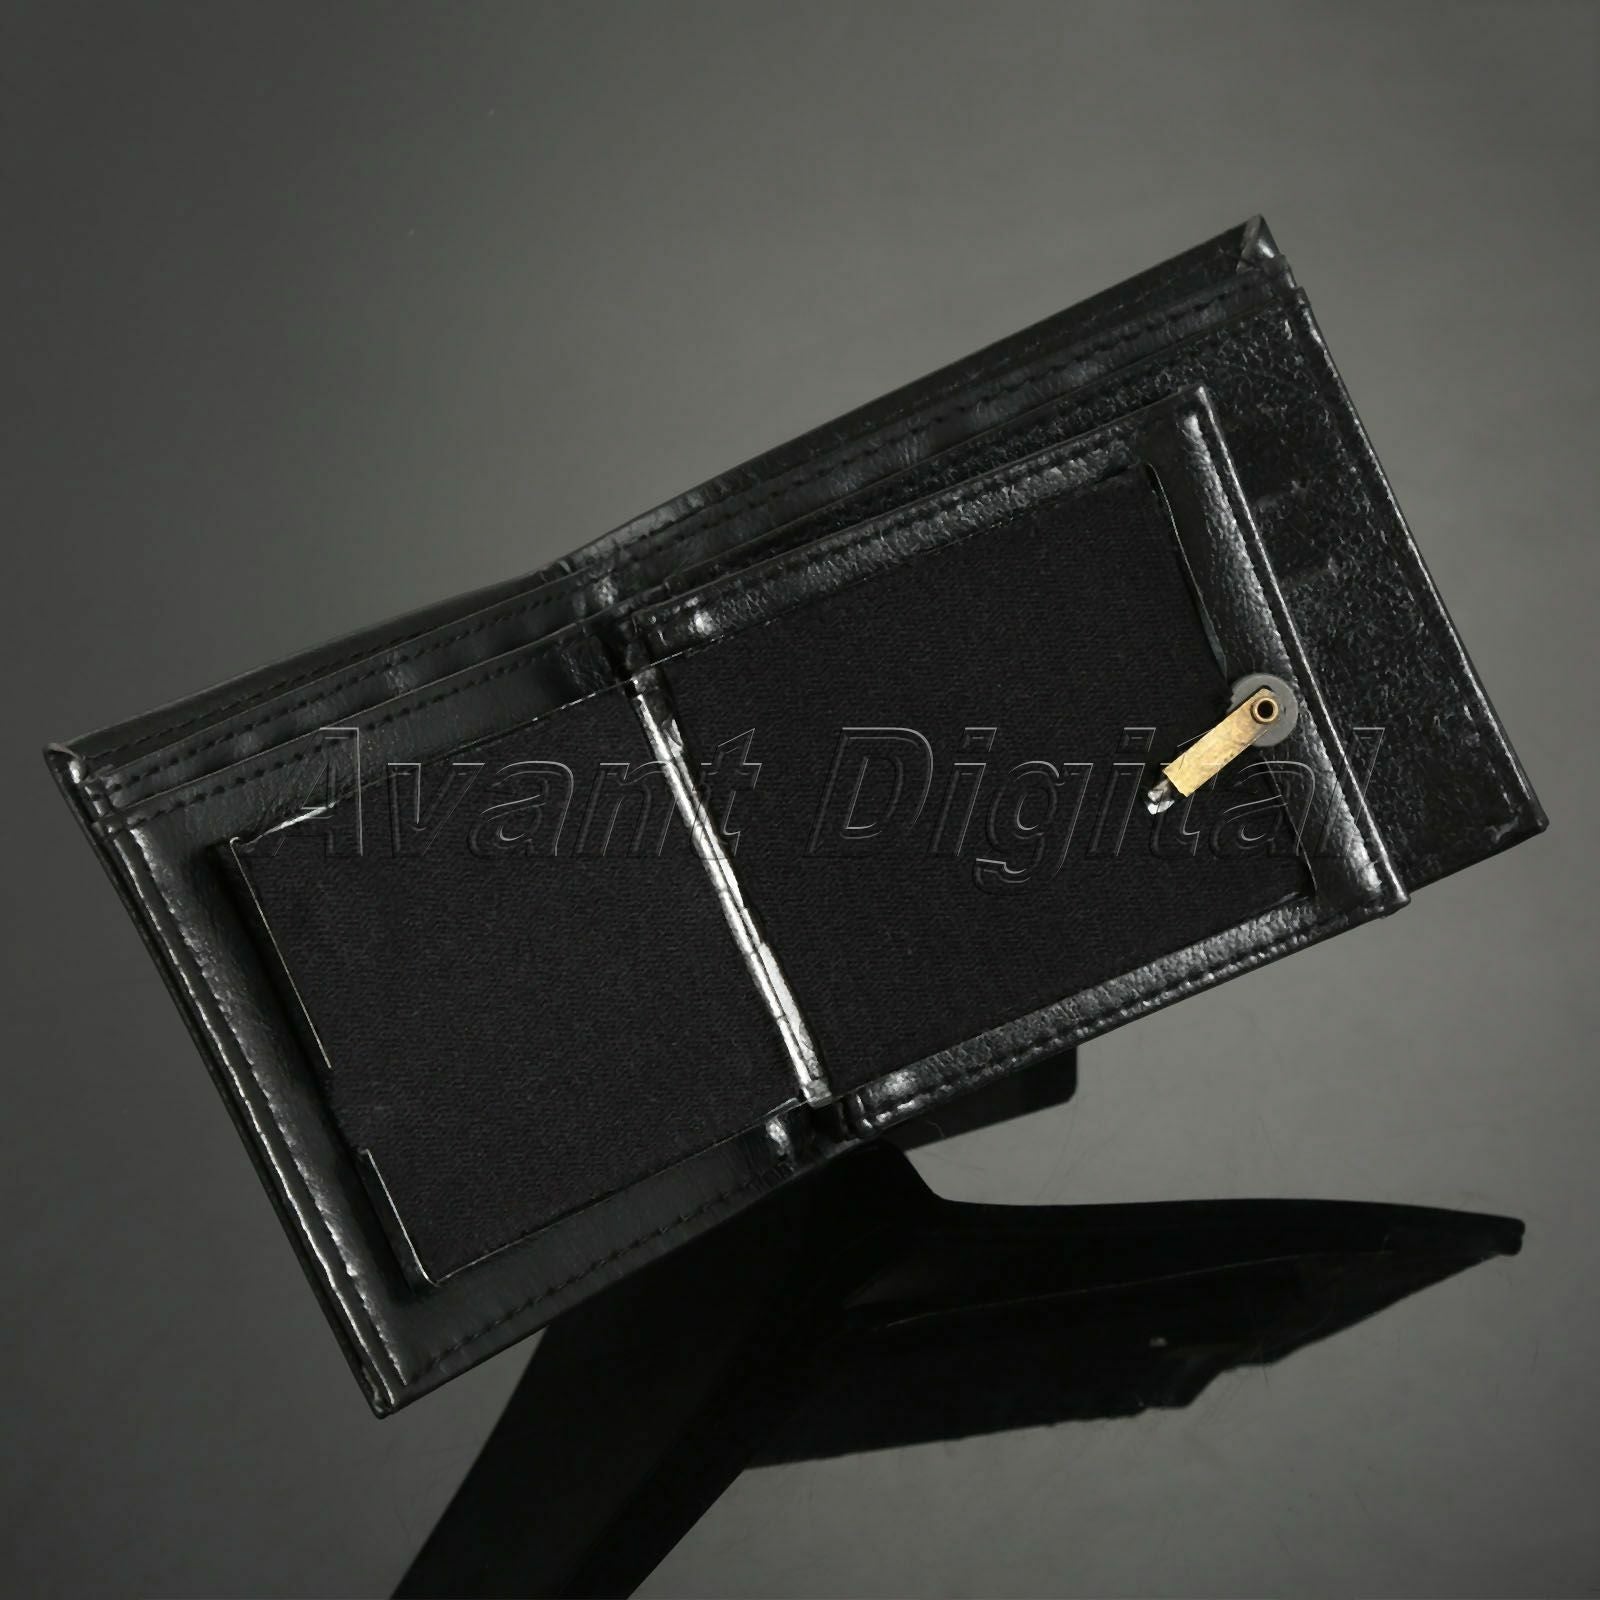 Magician Magic Trick Flame Fire Wallet Leather Stage Street Prop Magic Show